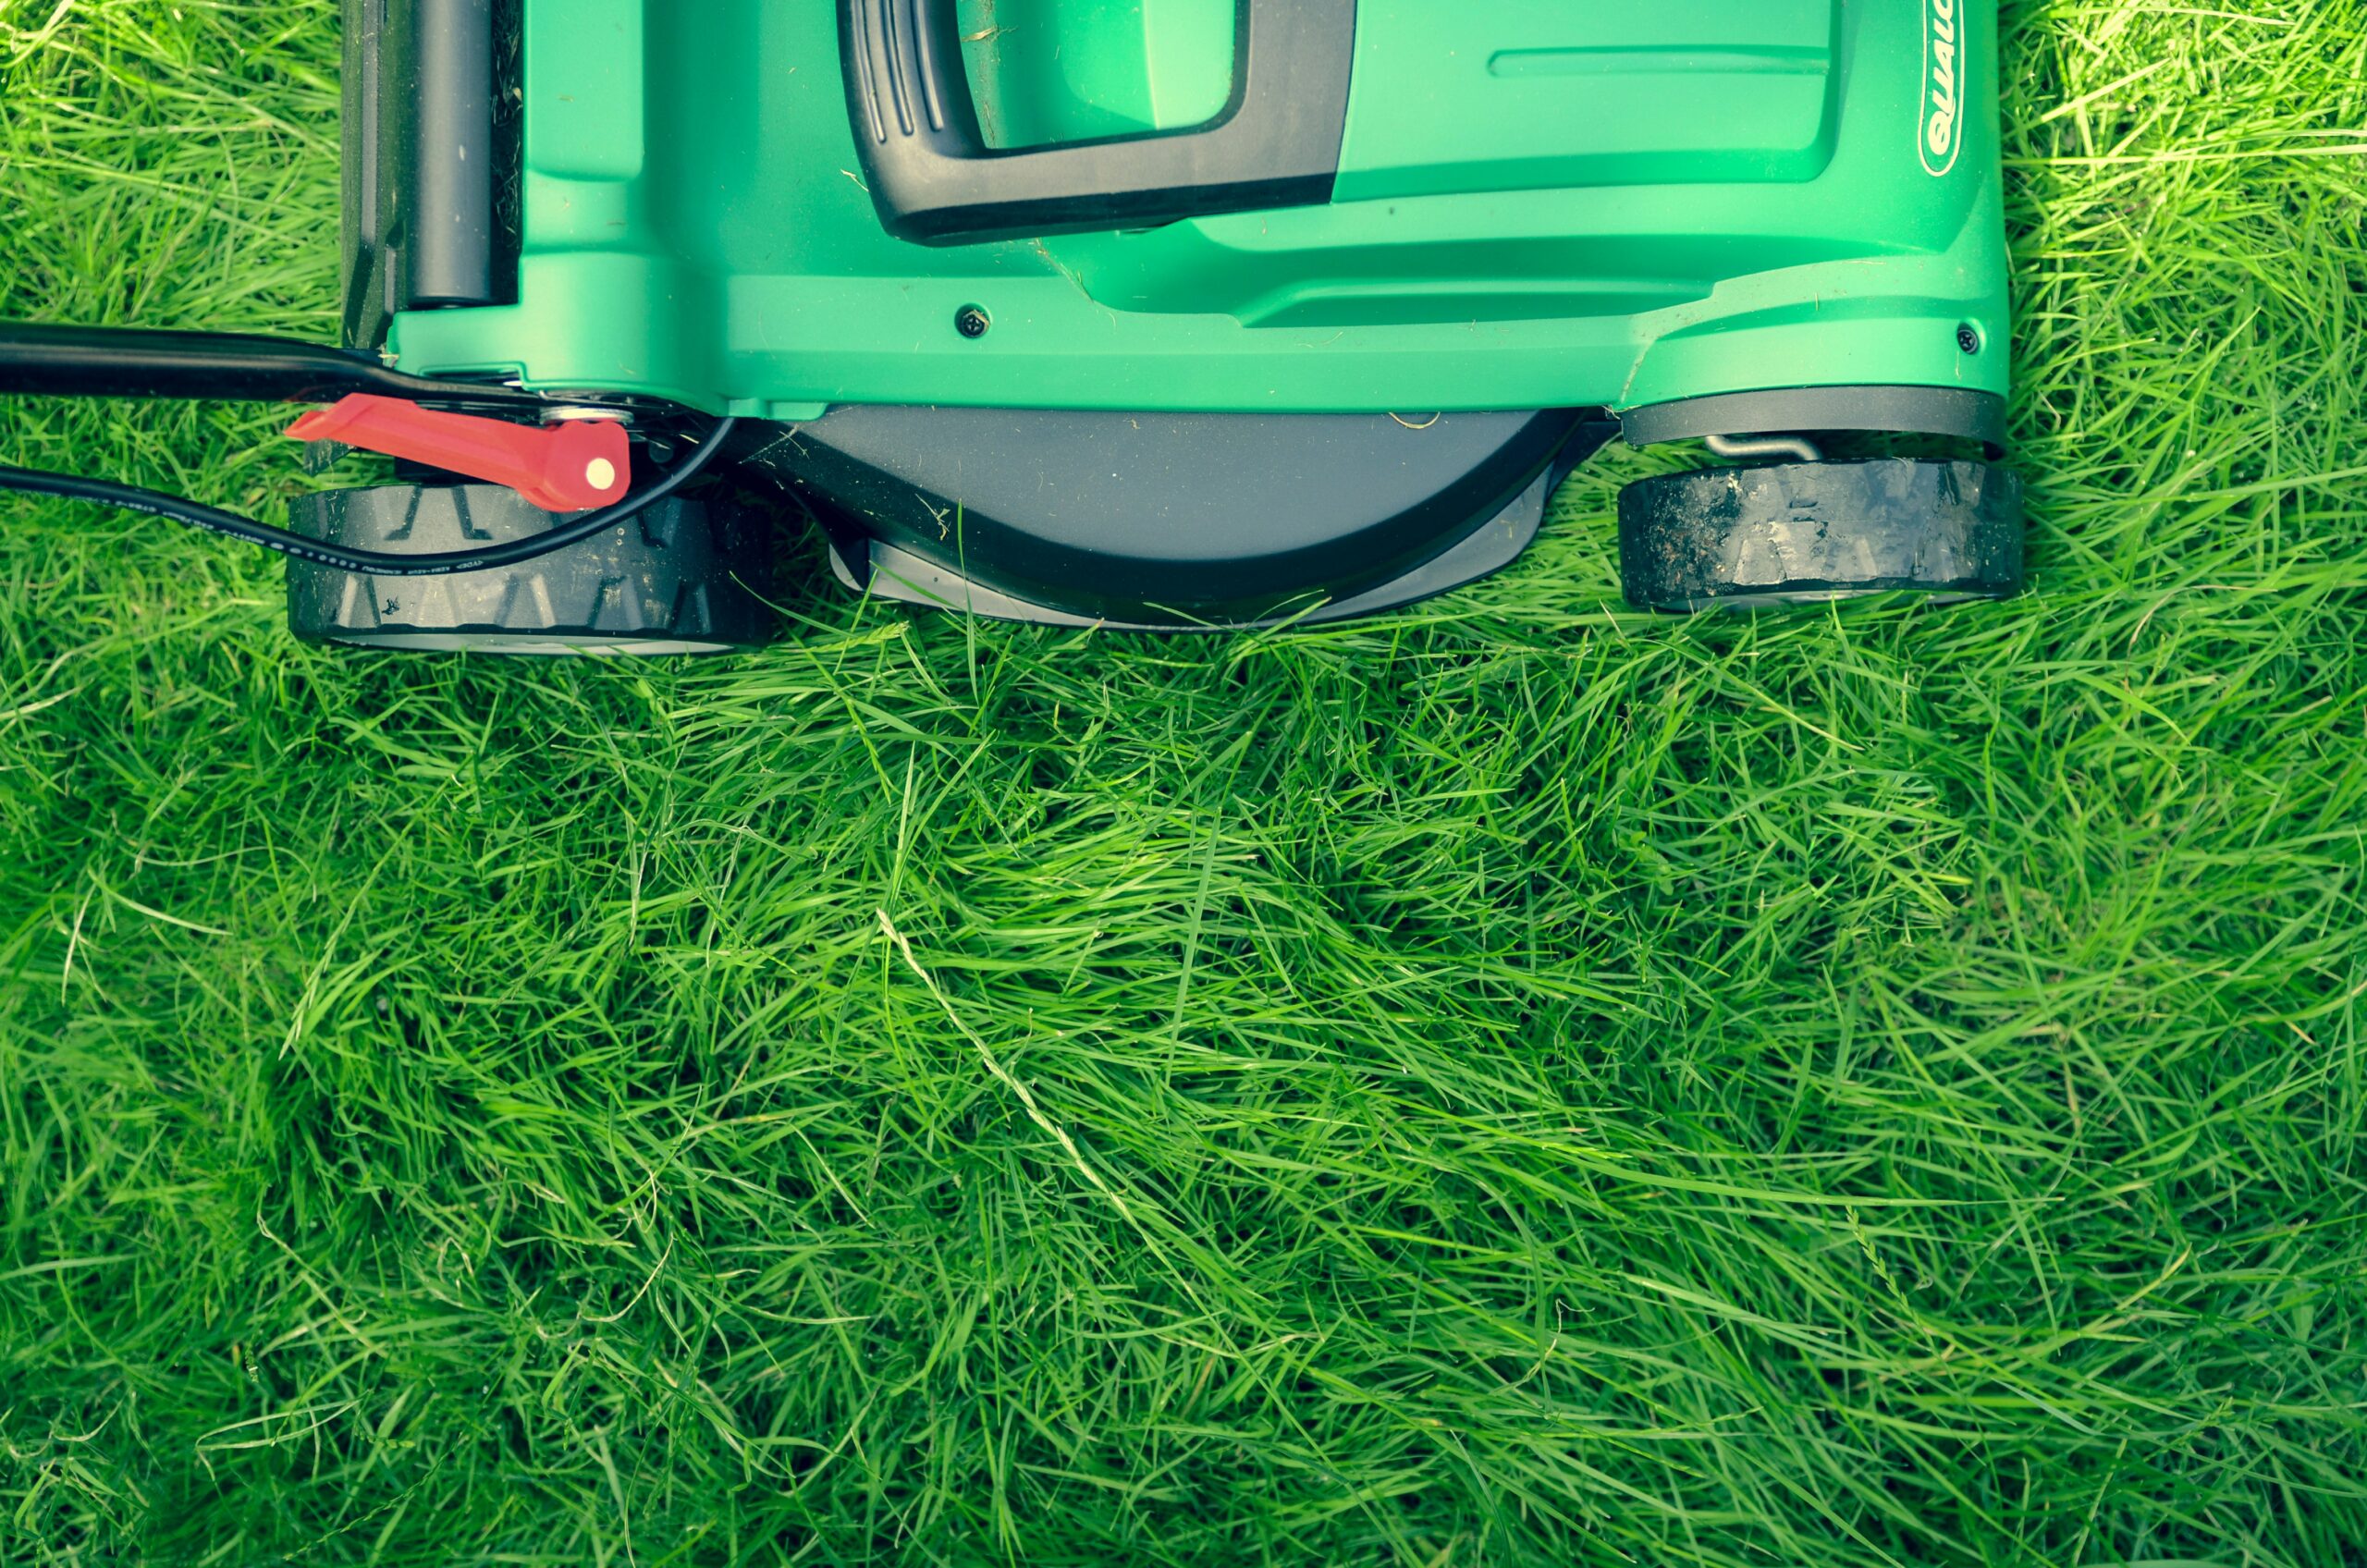 When dethatching a lawn, sometimes it's best to hire a professional. Pictured: A lawn being mown with a lawn mower